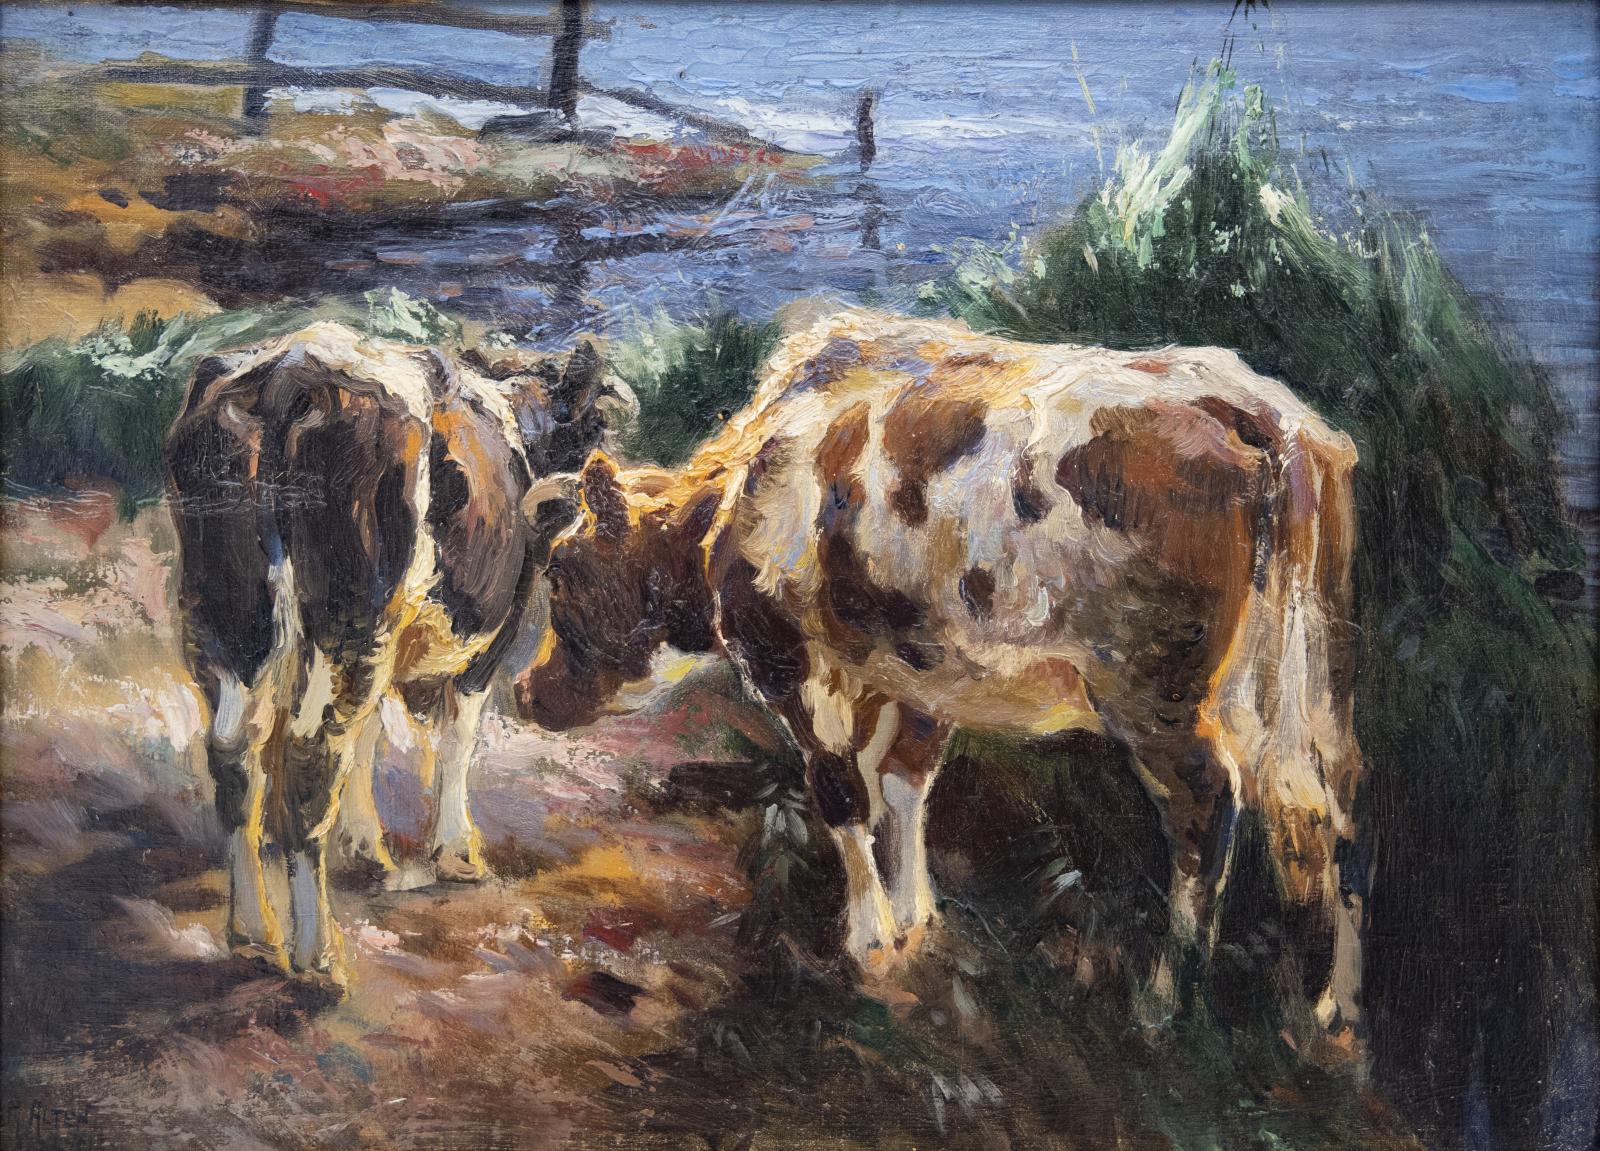 Oil painting on canvas and board of two cows, one from the rear, one from the side.